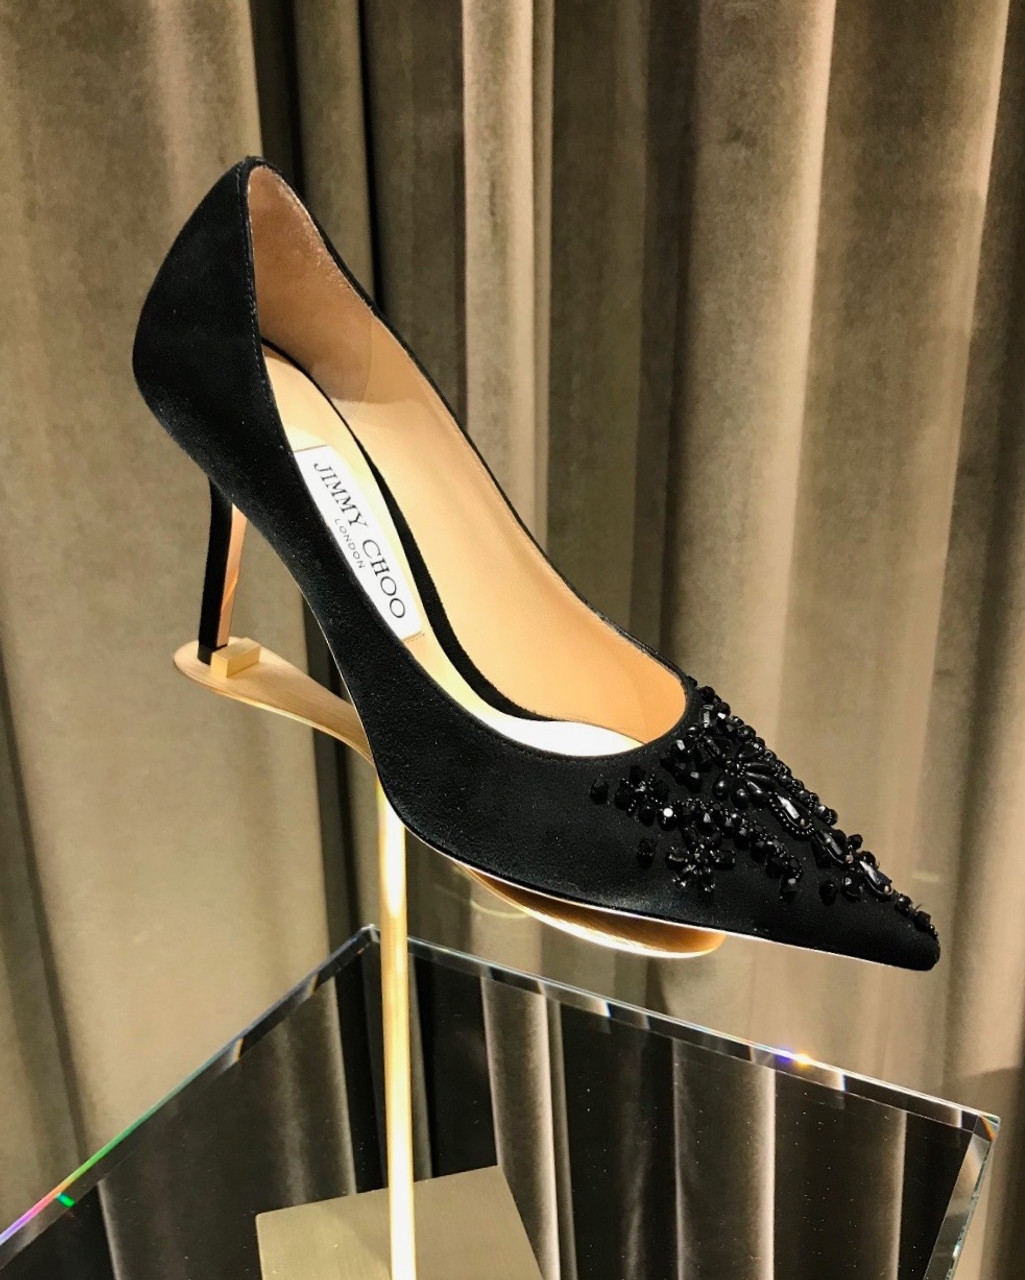 Jimmy Choo Love 85 Black Suede Pumps with Embroidery